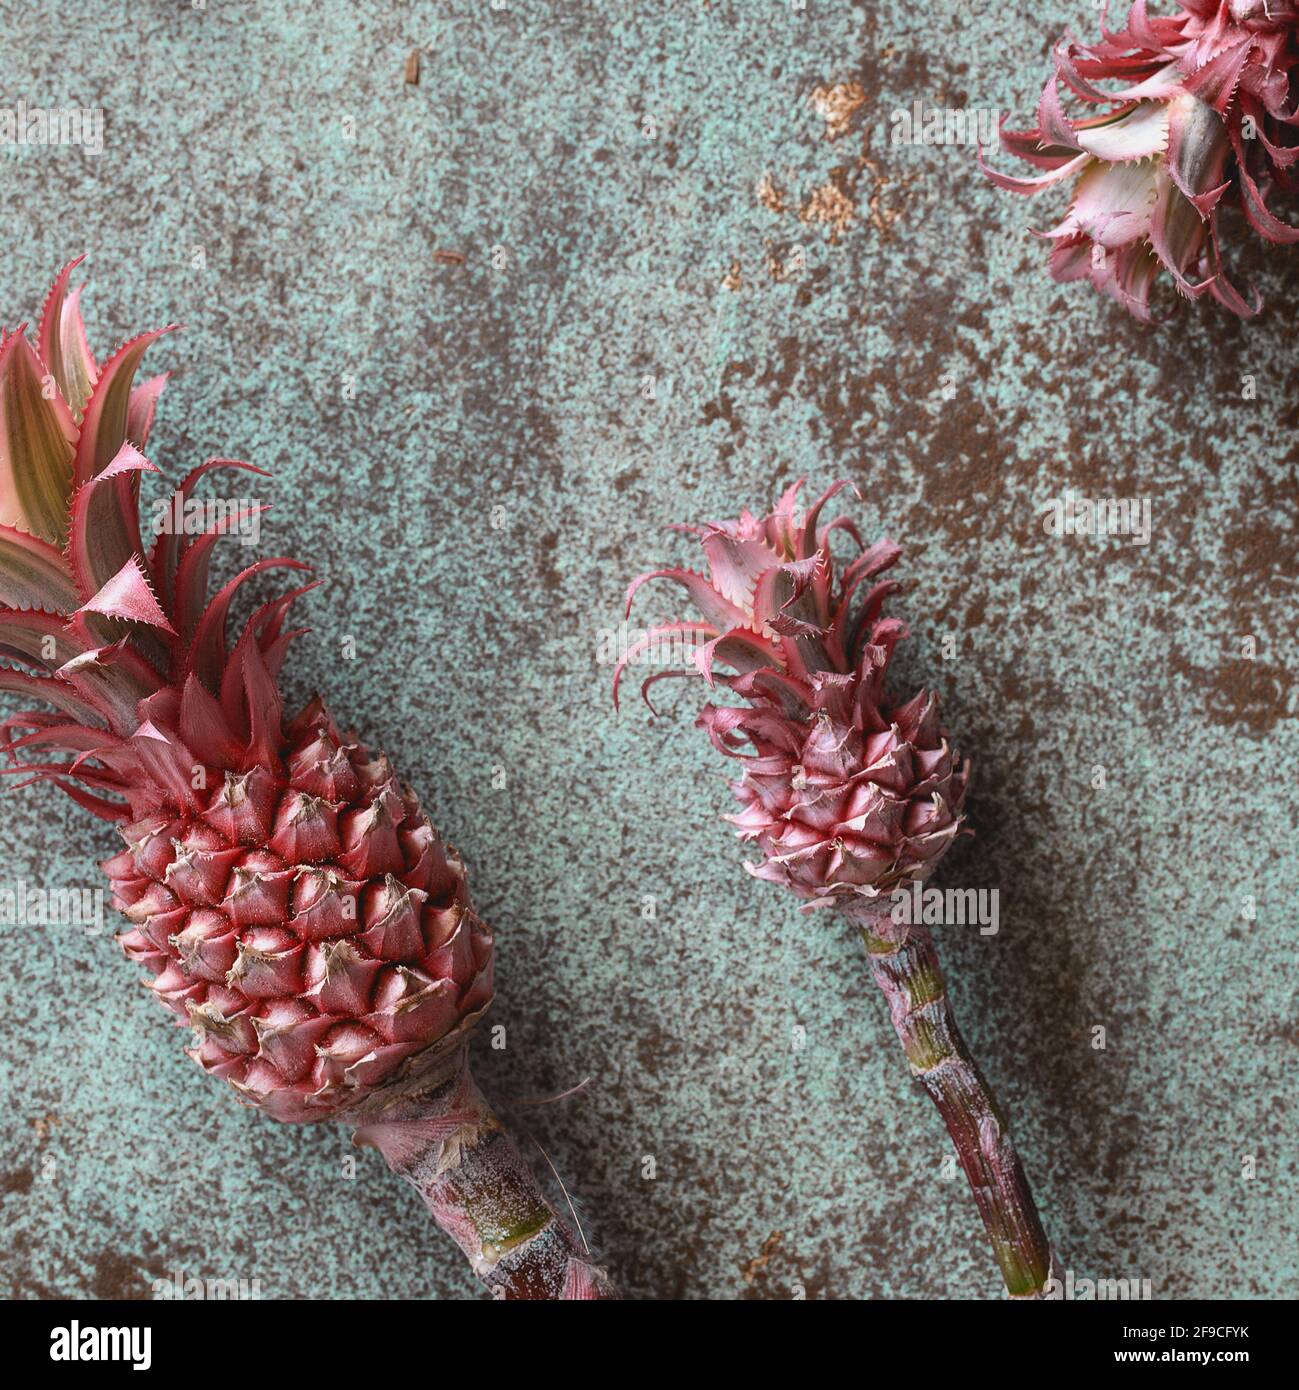 Decorative pink pineapples on turquoise background from above. Ananas Bracteatus bromeliad plant. Exotic floral design background Stock Photo